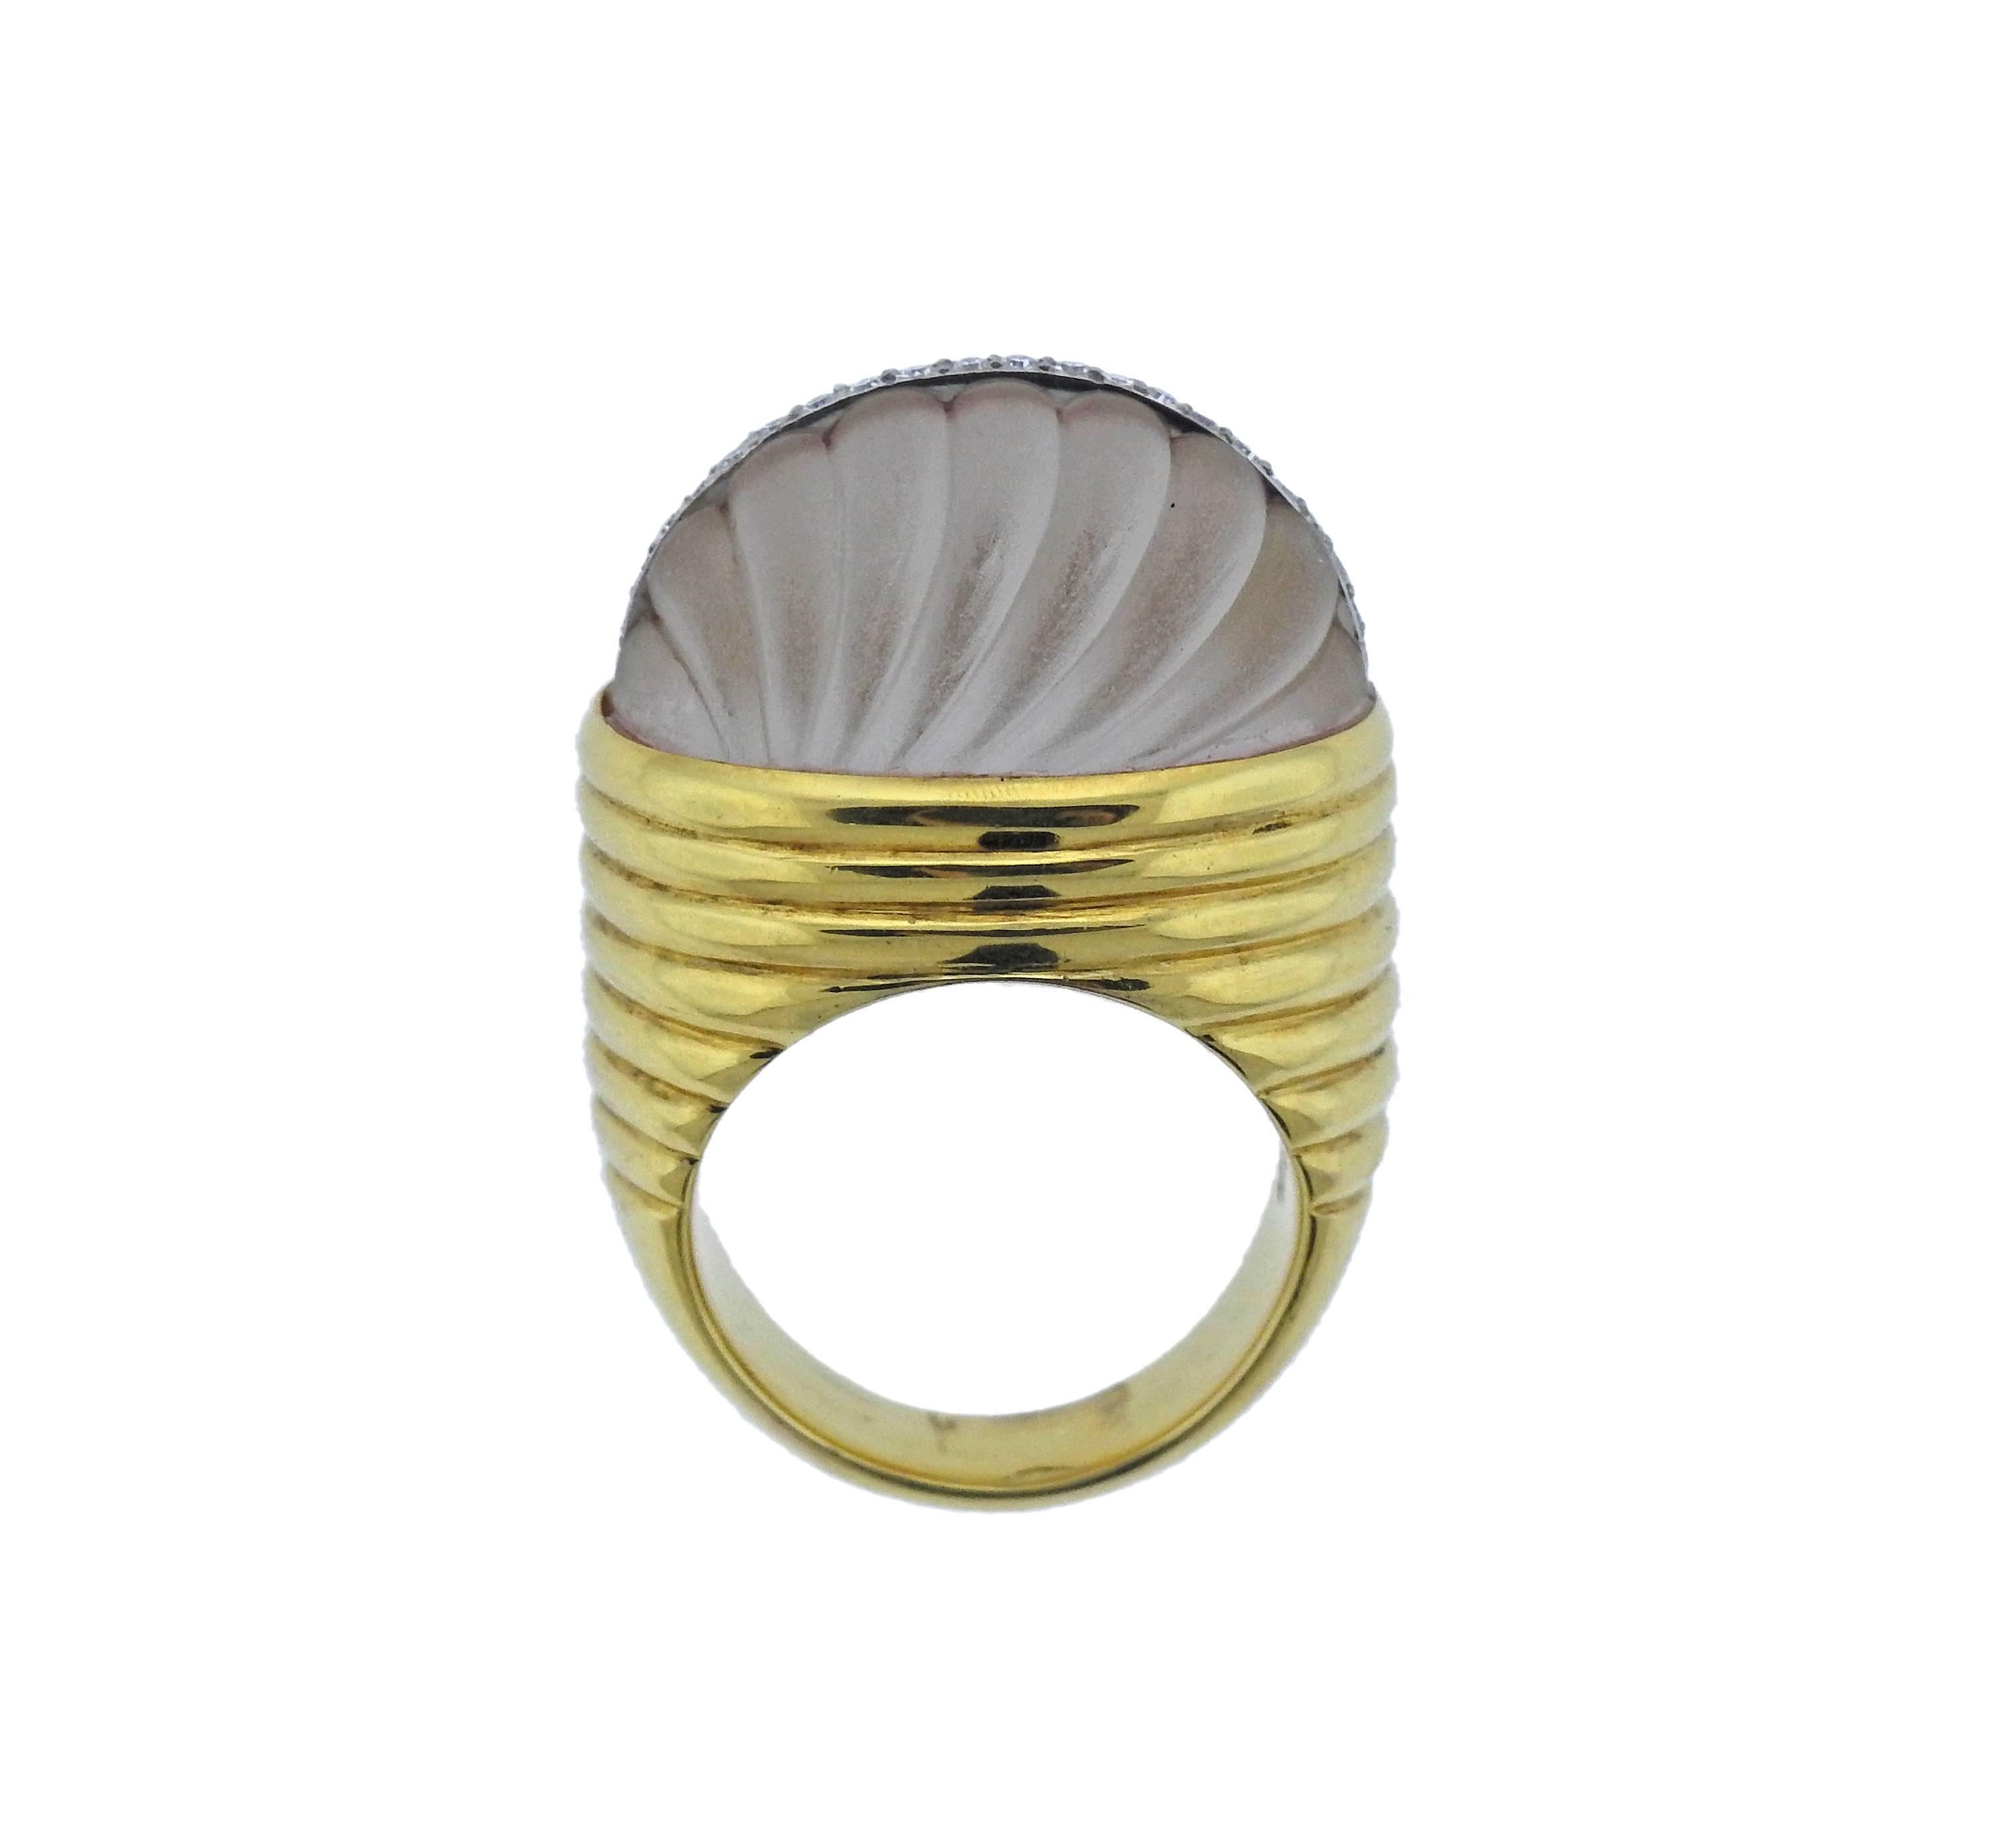 14k yellow gold ring featuring a carved frosted crystal and 0.20ctw H/ VS-SI diamonds. Ring size - 8.75, ring top is 20mm x 26mm, sits approx. 17mm from the top of the finger. Weighs 26.6 grams. Marked 14k.